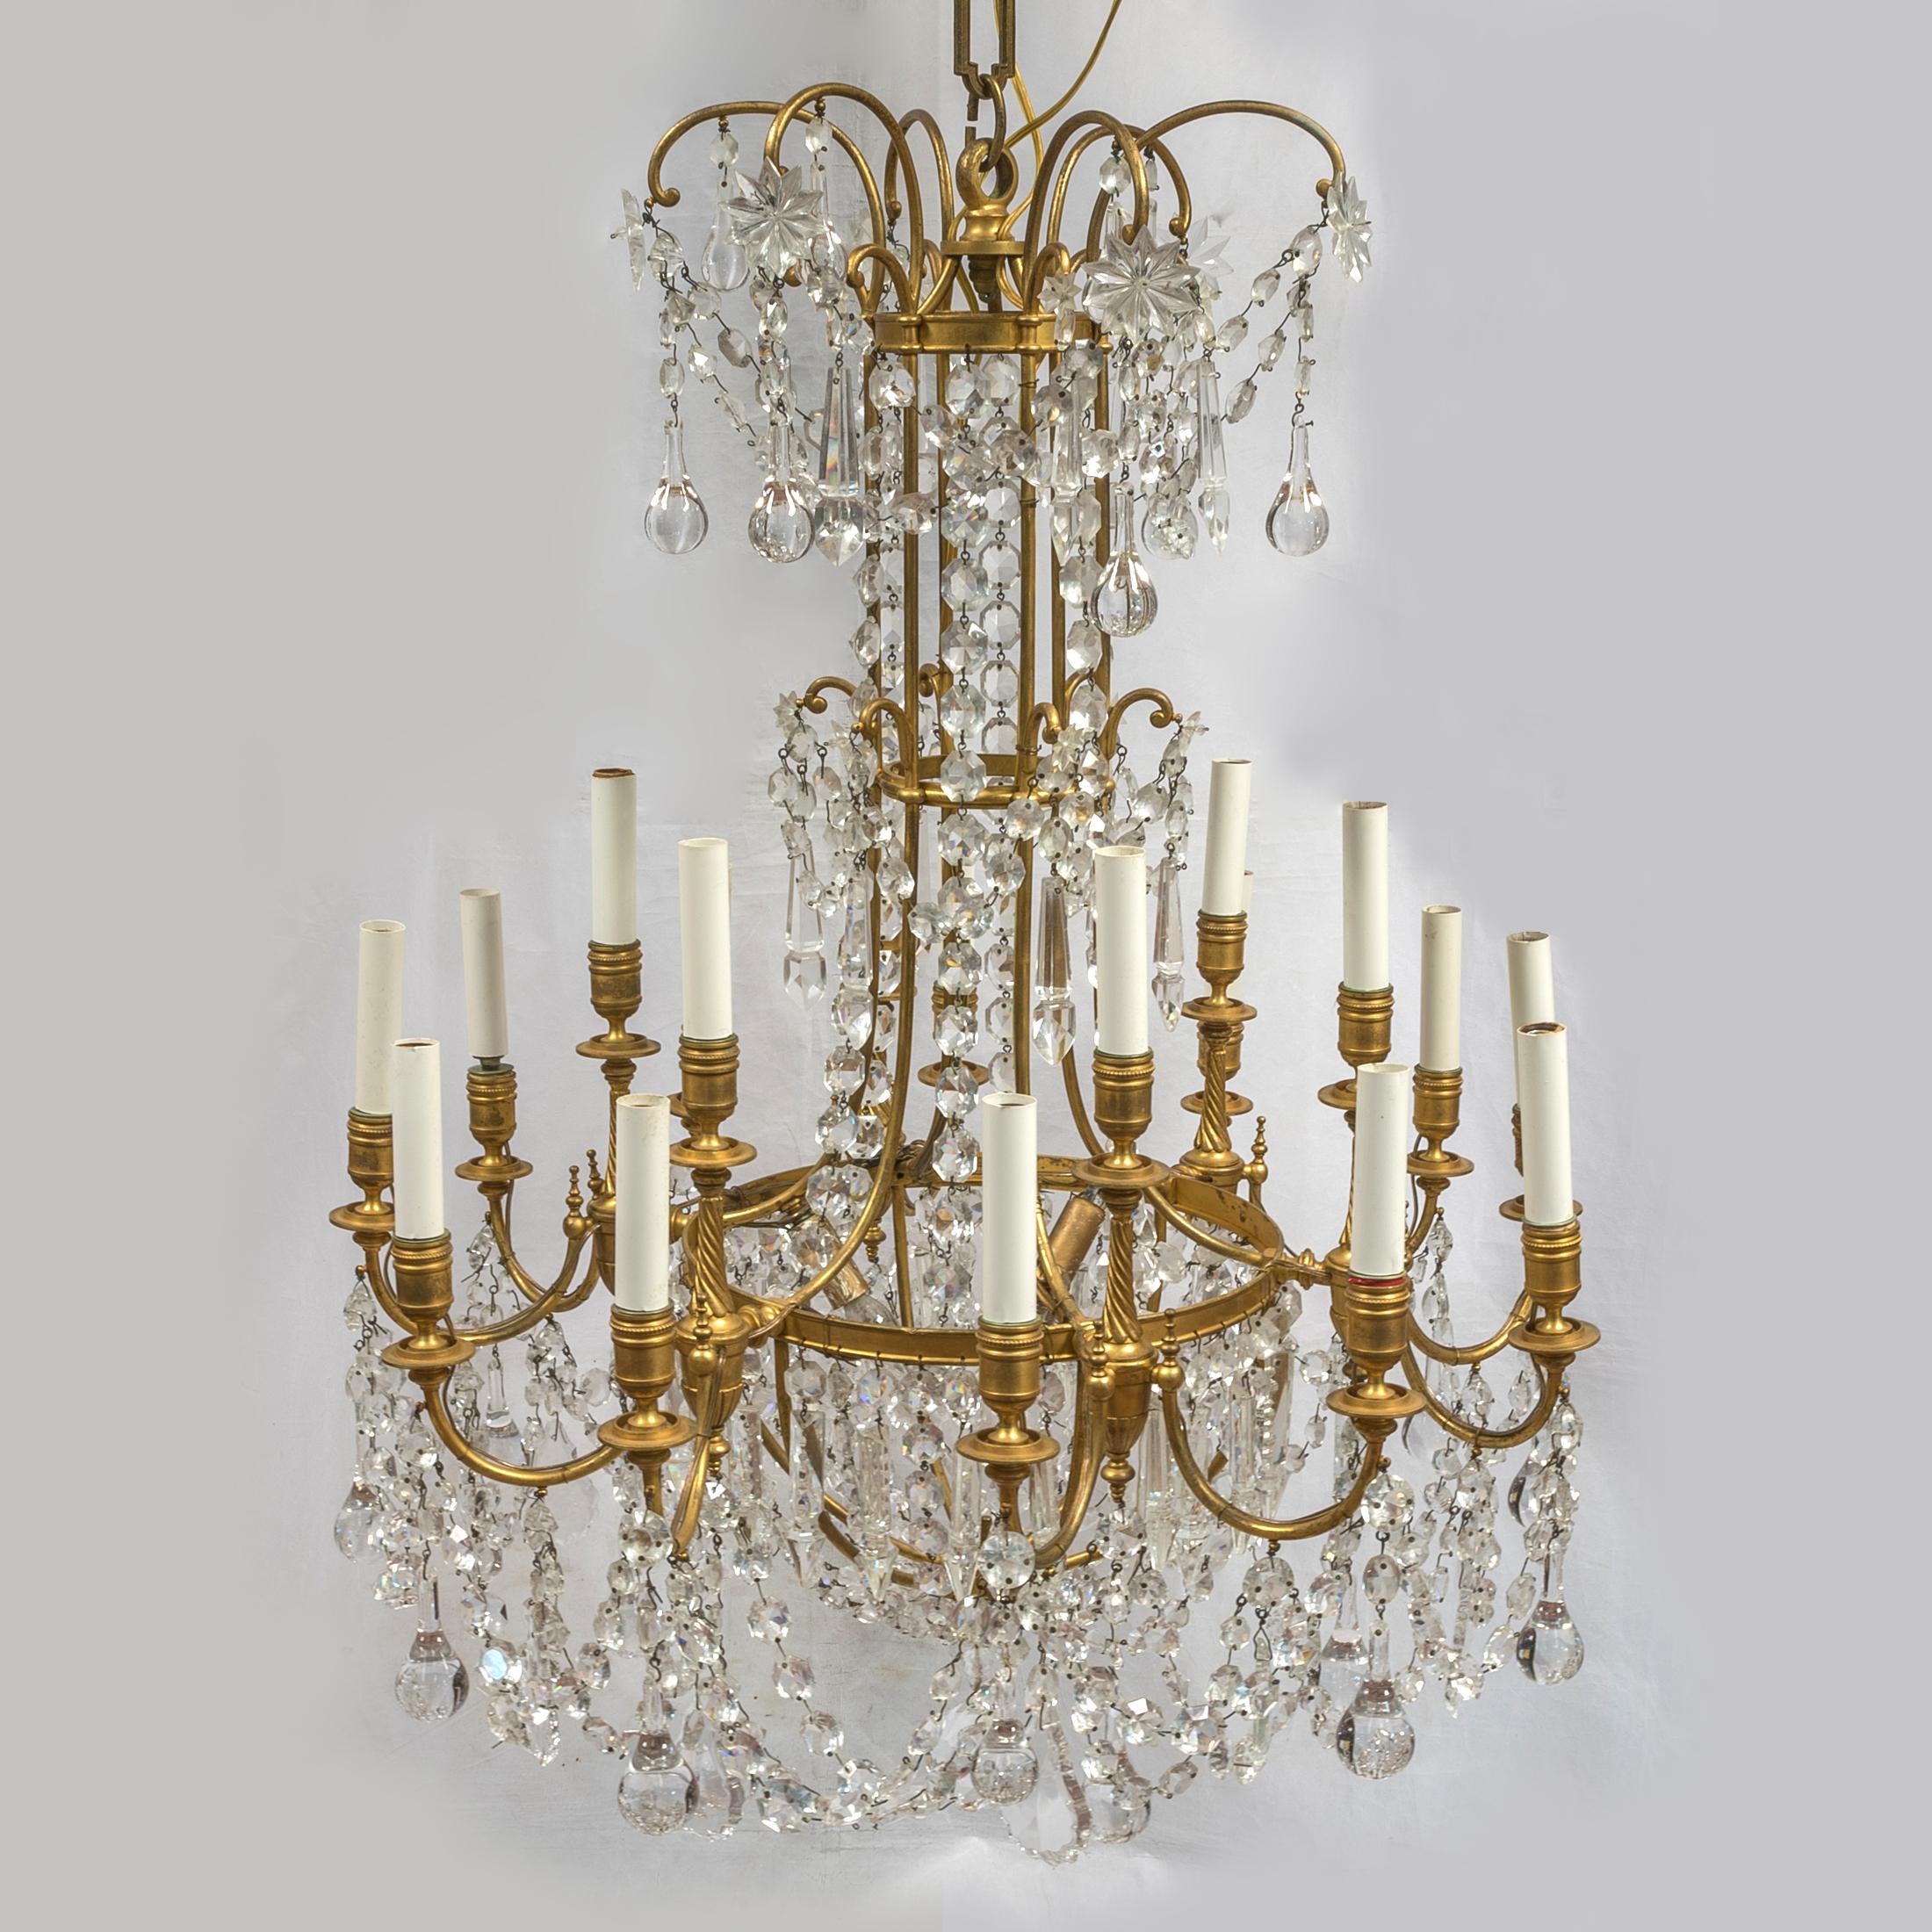 About

A magnificent French ormolu and baccarat crystal 18-light chandelier cut and molded glass suspending beaded strands shaped prisms and tear-shaped drops.

Date: 19th century
Origin: French
Size: 35 x 26 inches.